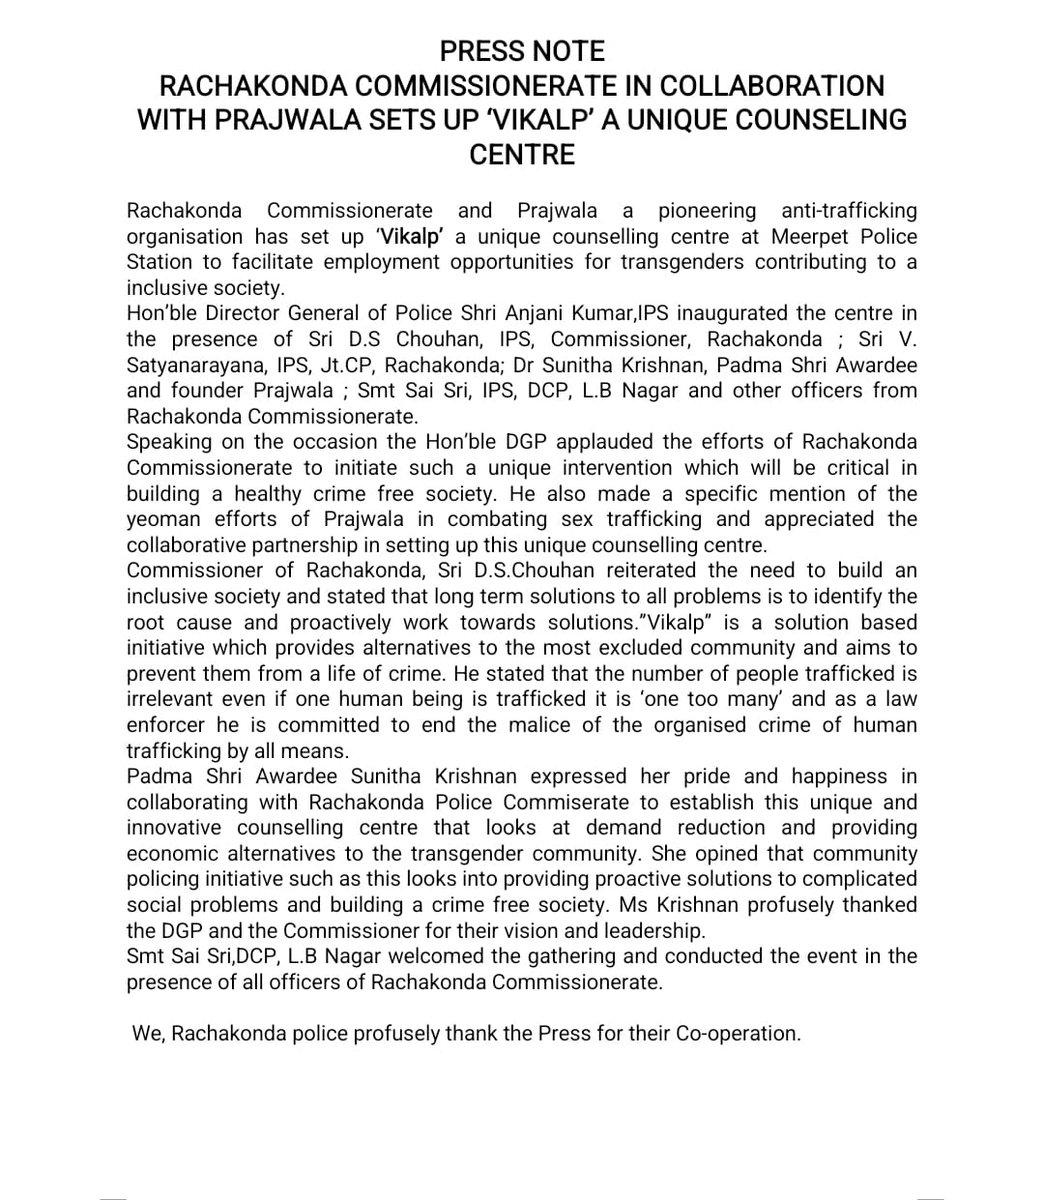 RACHAKONDA COMMISSIONERATE IN COLLABORATION WITH PRAJWALA SETS UP VIKALP A UNIQUE COUNSELING CENTRE AT MEERPET PS,LB NAGAR ZONE .